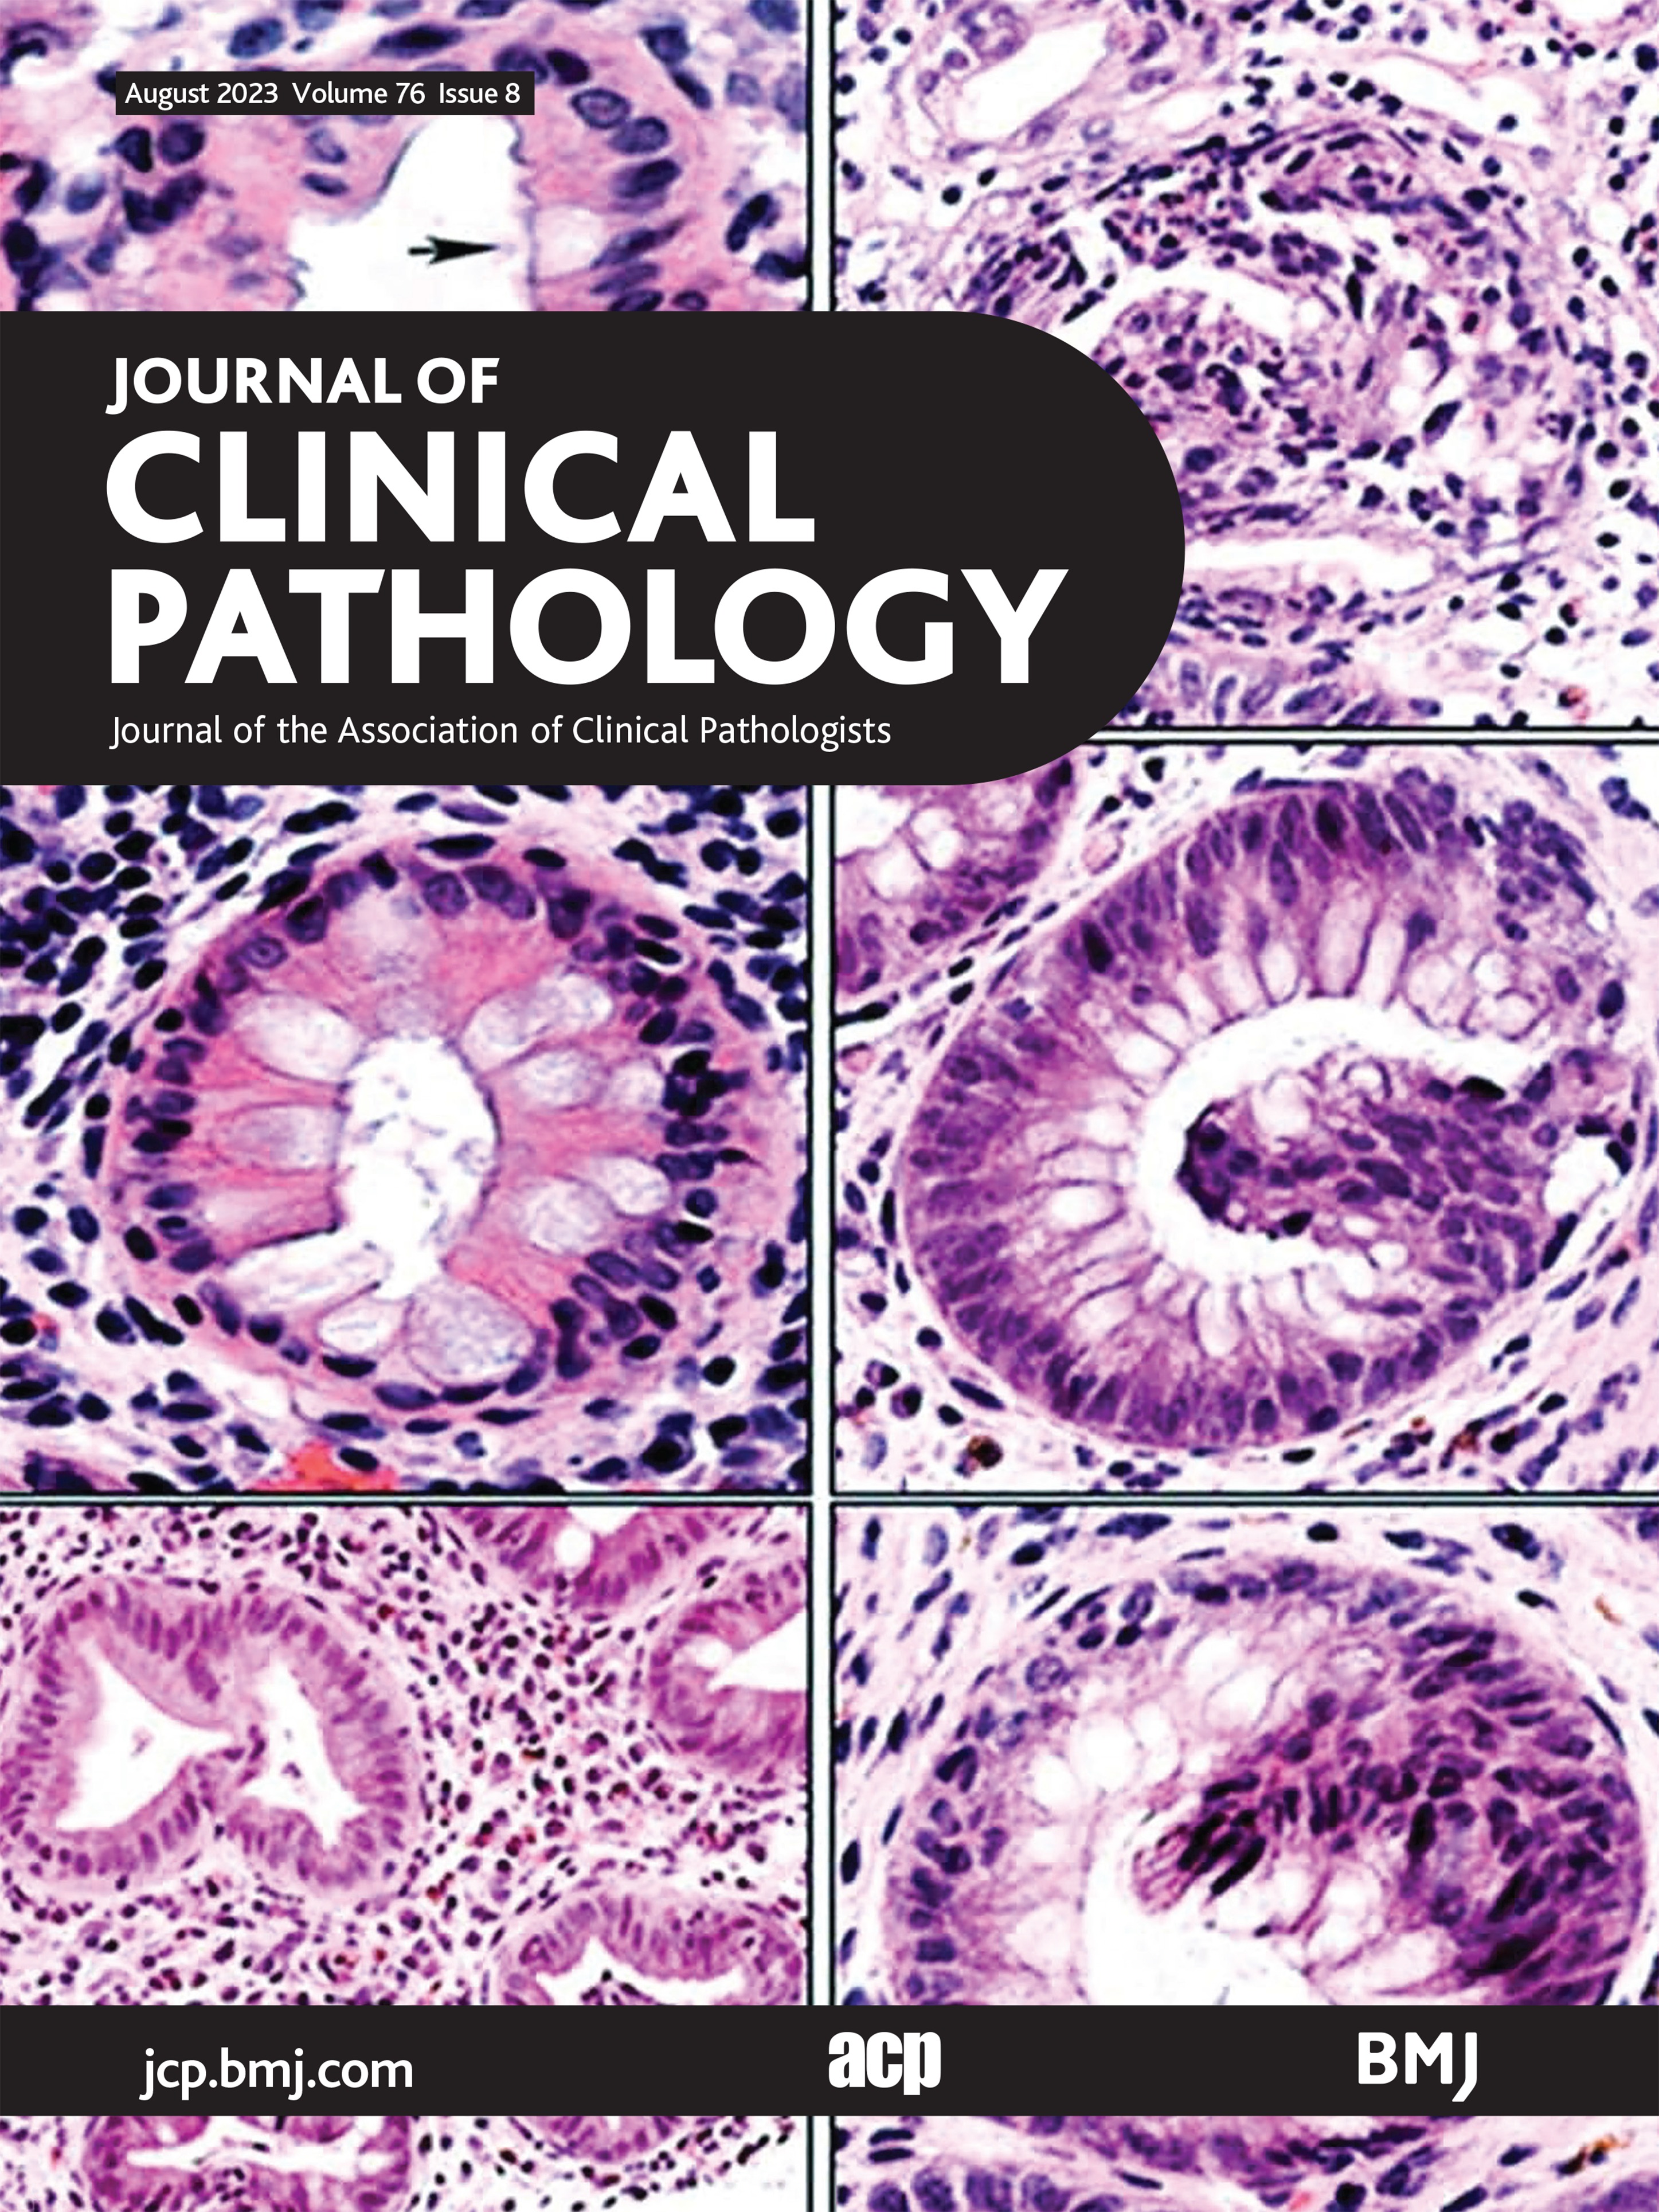 Novel histological repertoire of crypt-associated anomalies in inflamed colon mucosa